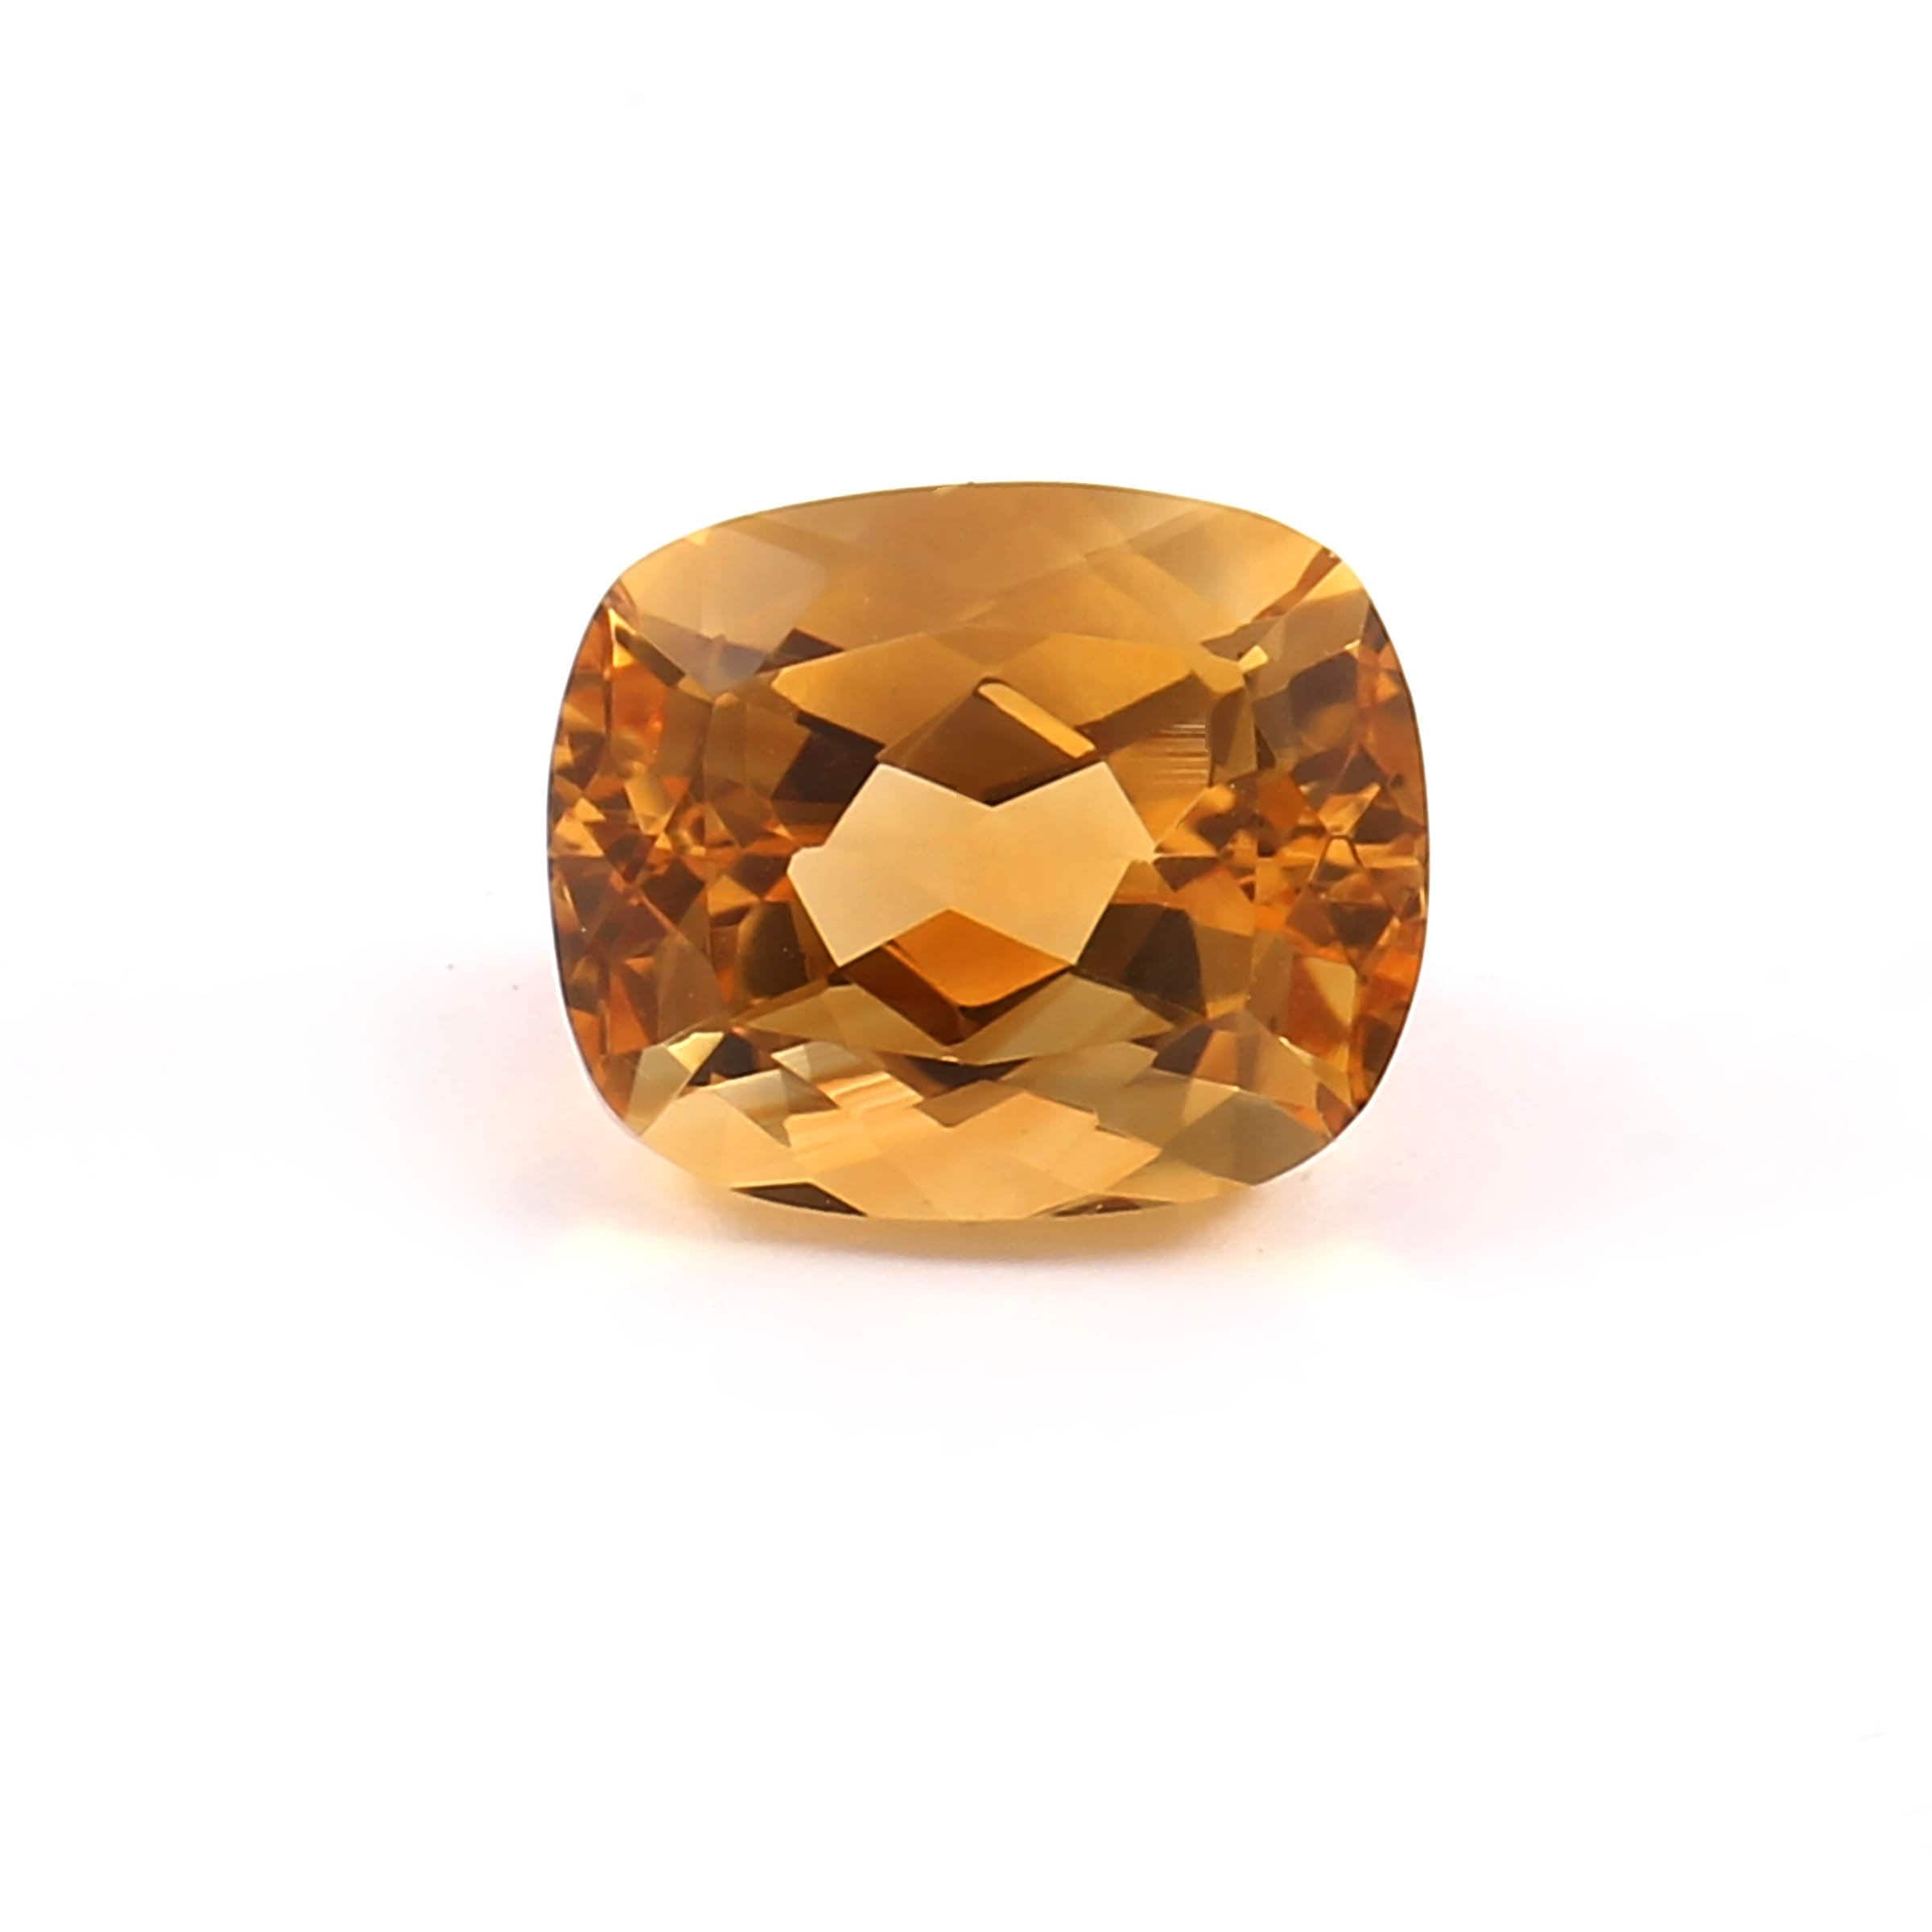 Stunning Top Grade AAA Quality Natural Golden Citrine Faceted Gemstone Excellent Cut Radiant Shape Loose Gemstone For Making Jewelry CO1008